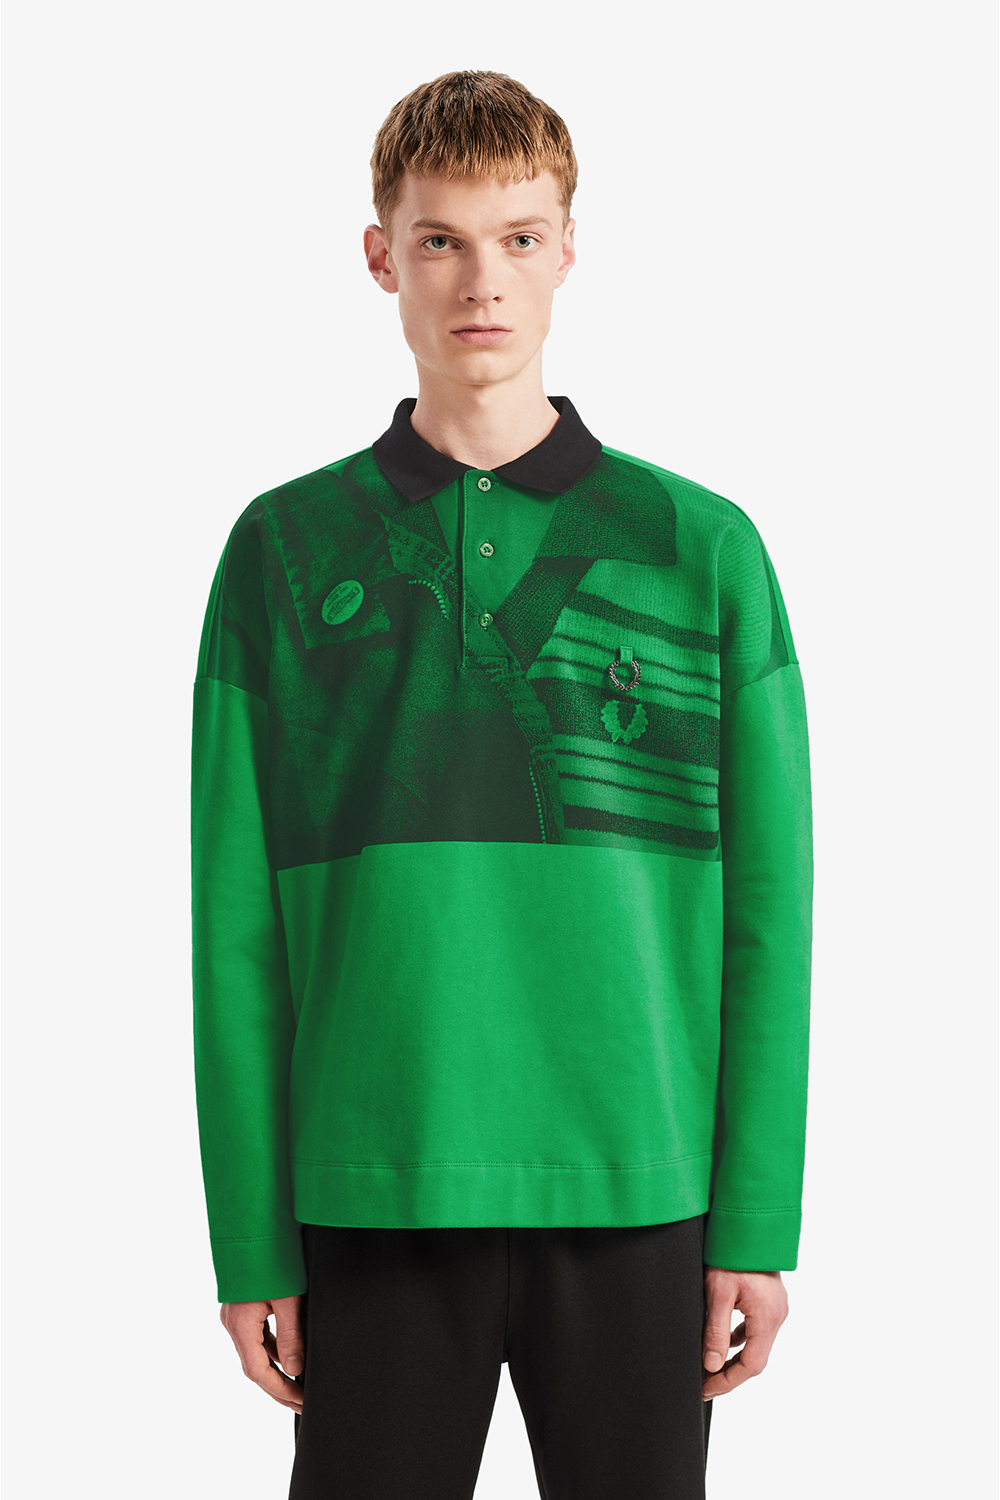 Check out the latest Raf Simons x Fred Perry Drop for AW19